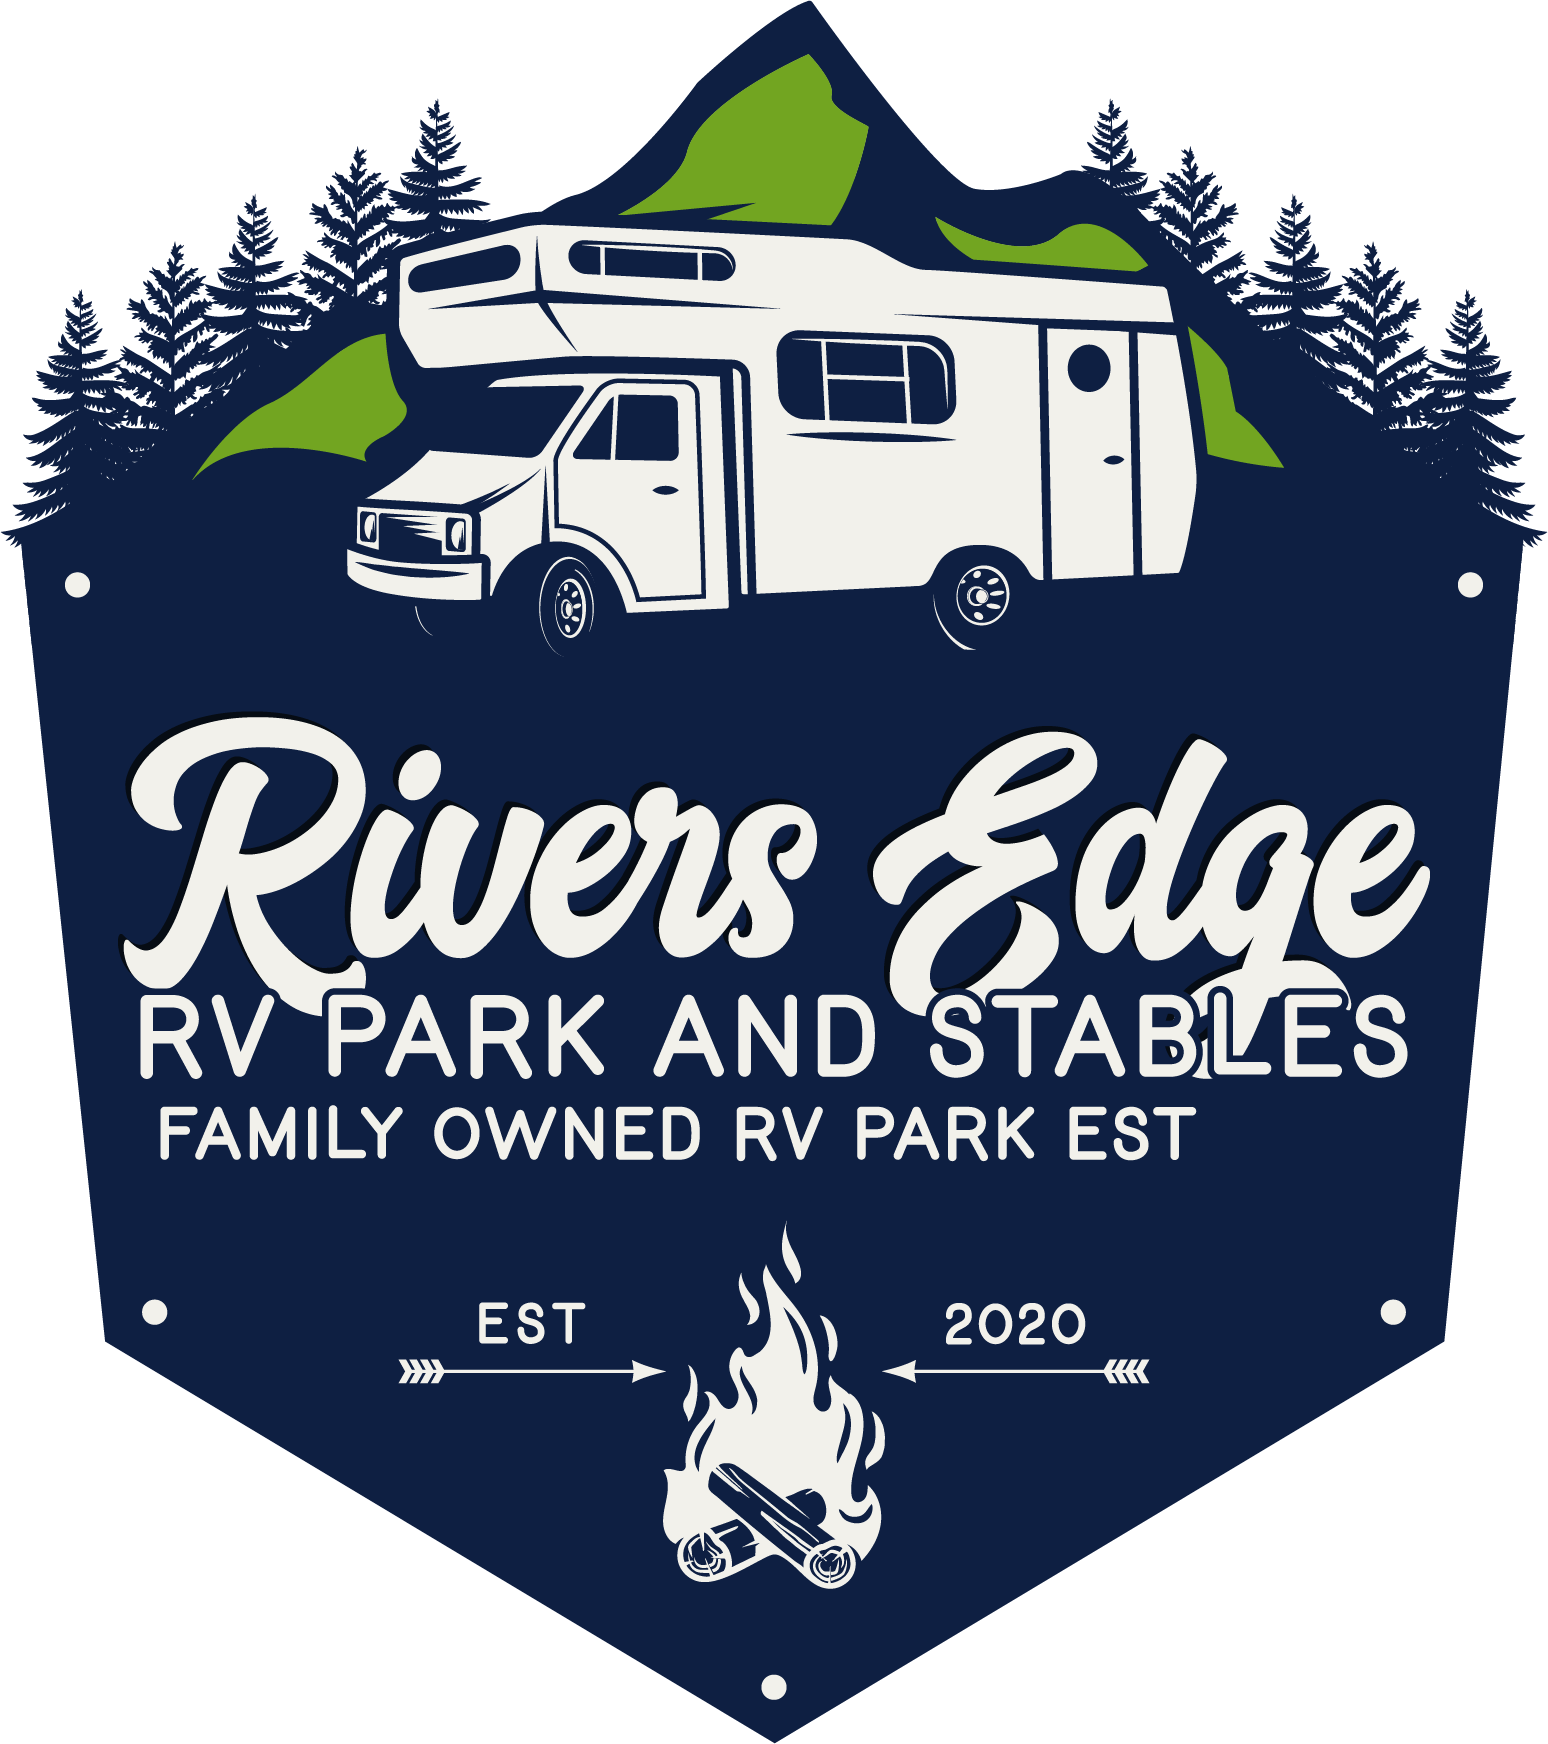 CX-56589_Rivers Edge RV Park and Stables_Final